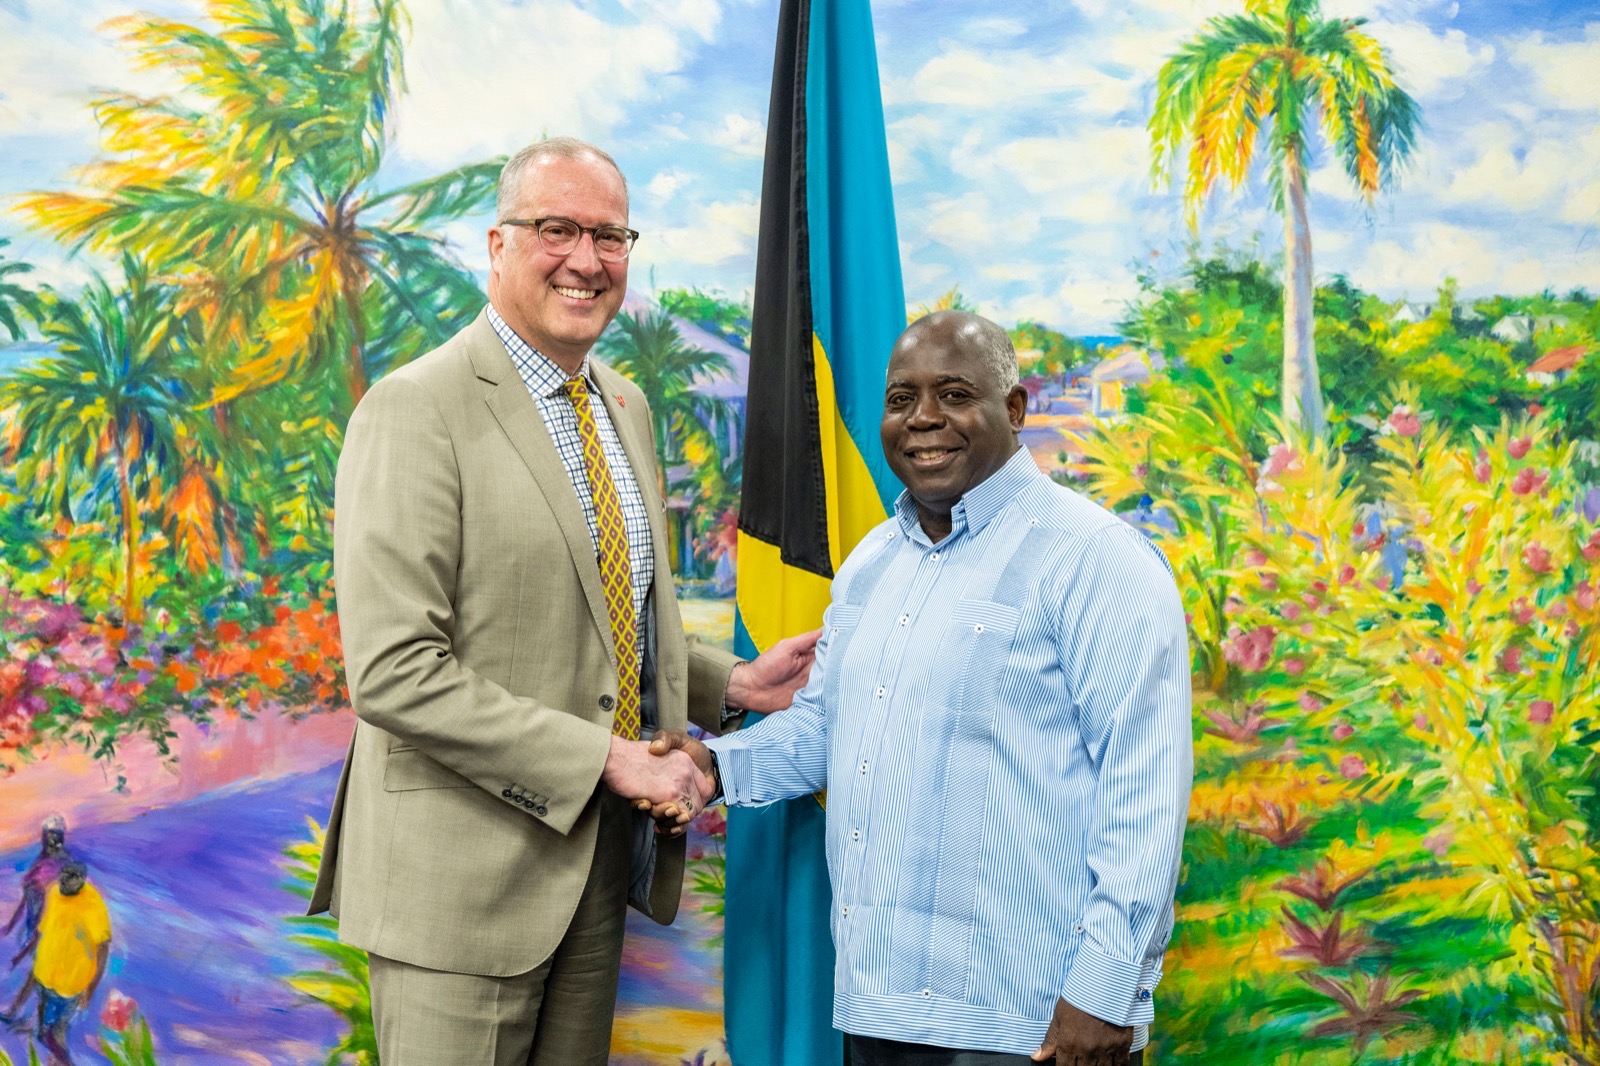 President Brian J. Bruess meets with Hon. Philip Davis KC, MP the Bahamian Prime Minister